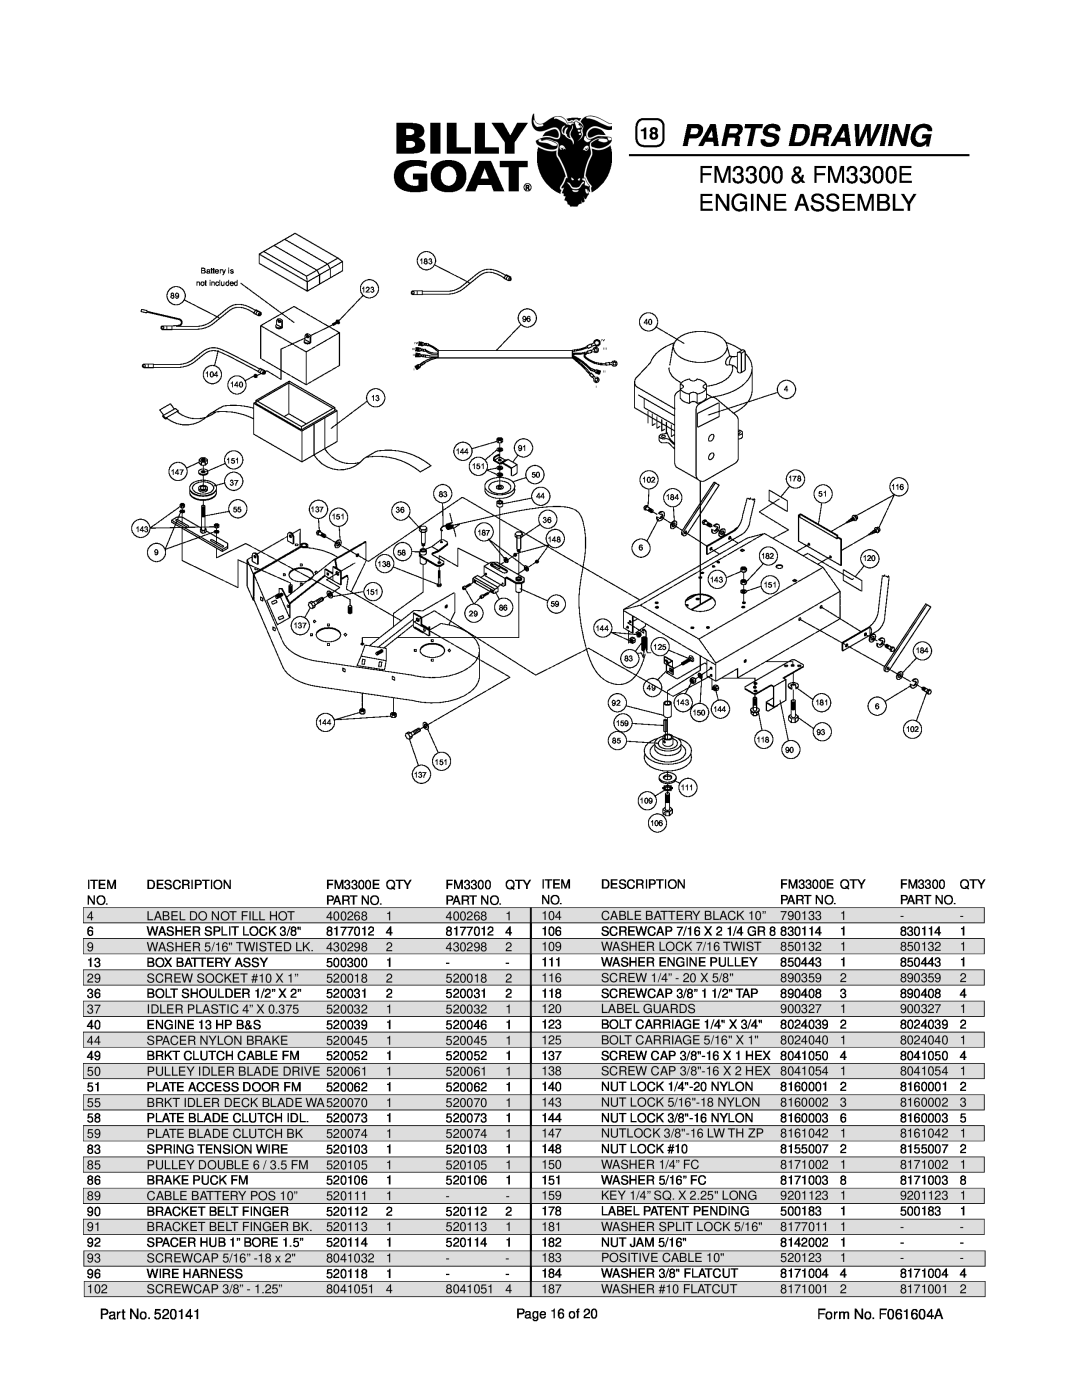 Billy Goat owner manual FM3300 & FM3300E ENGINE ASSEMBLY, Parts Drawing 